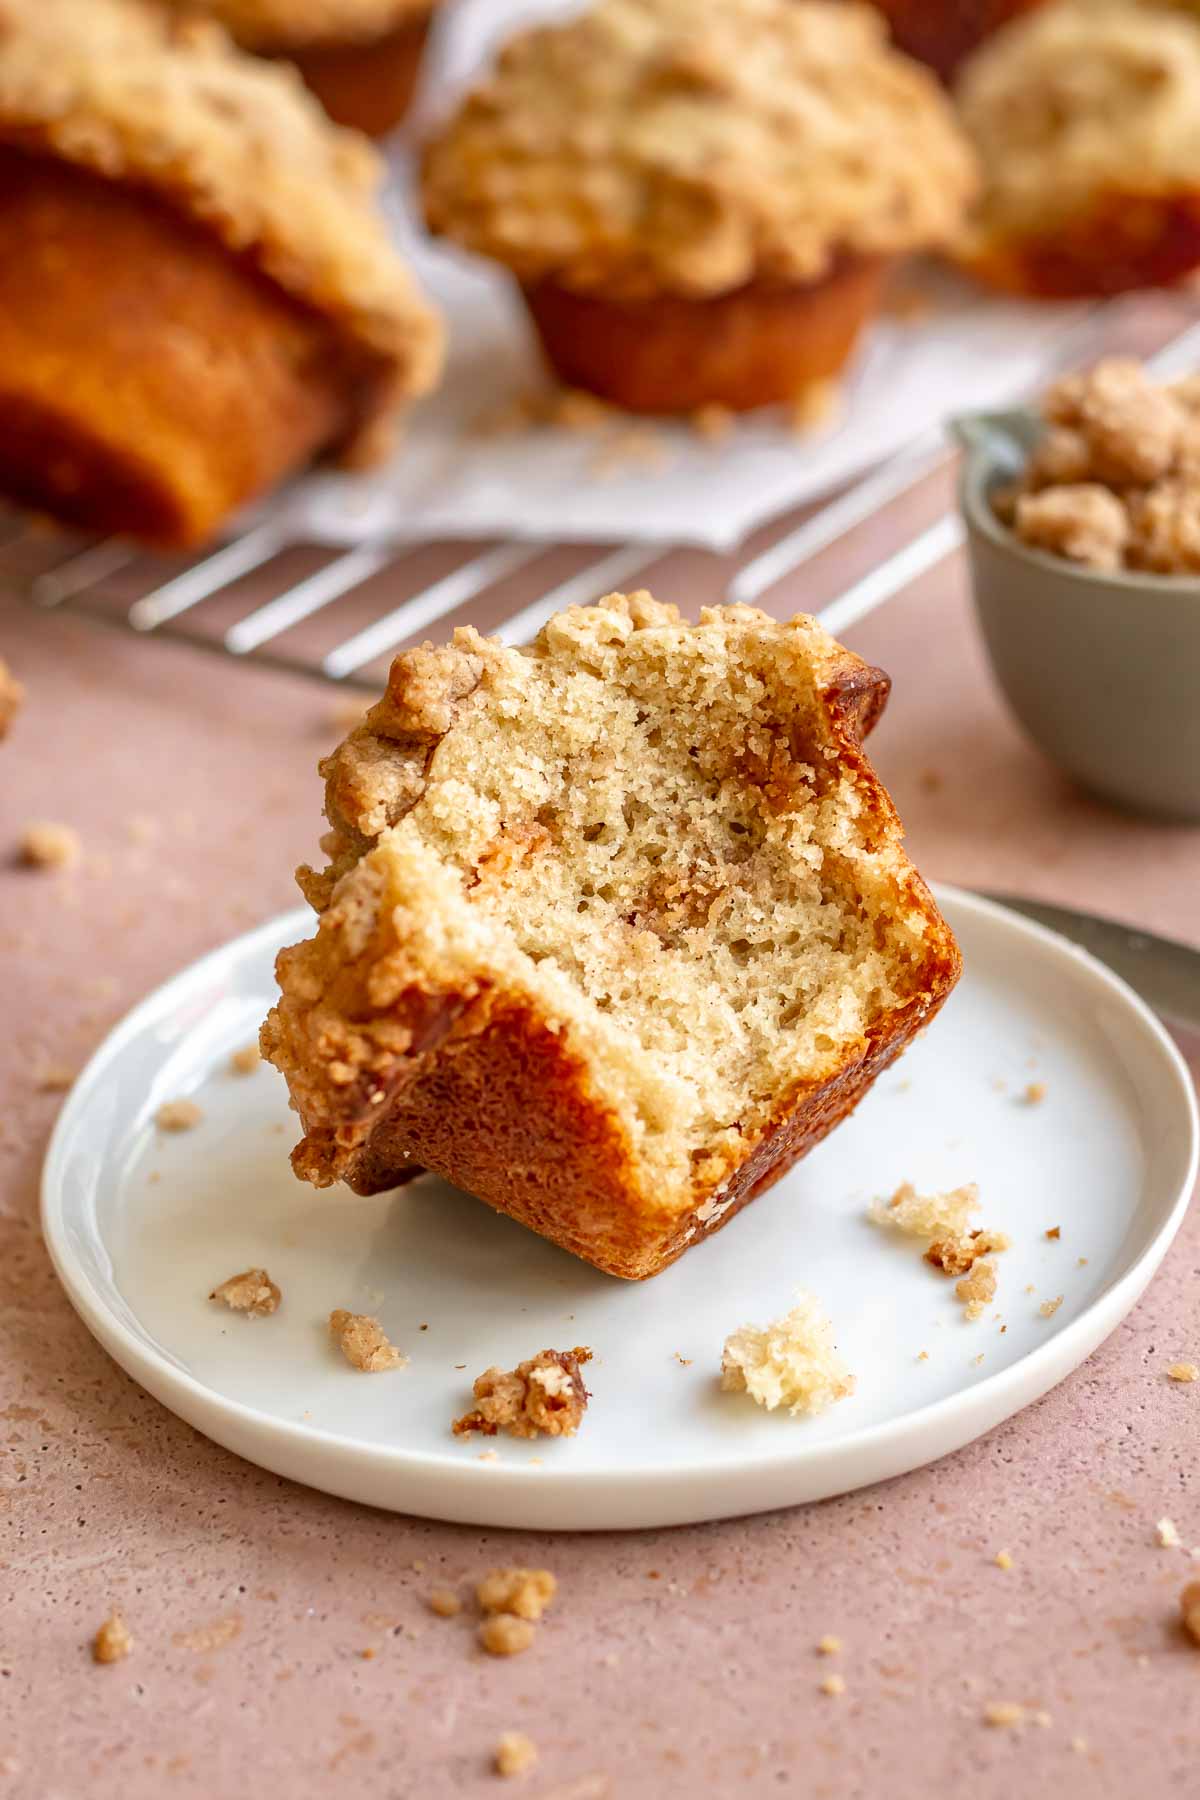 Cinnamon streusel muffin on a plate with a bite removed.